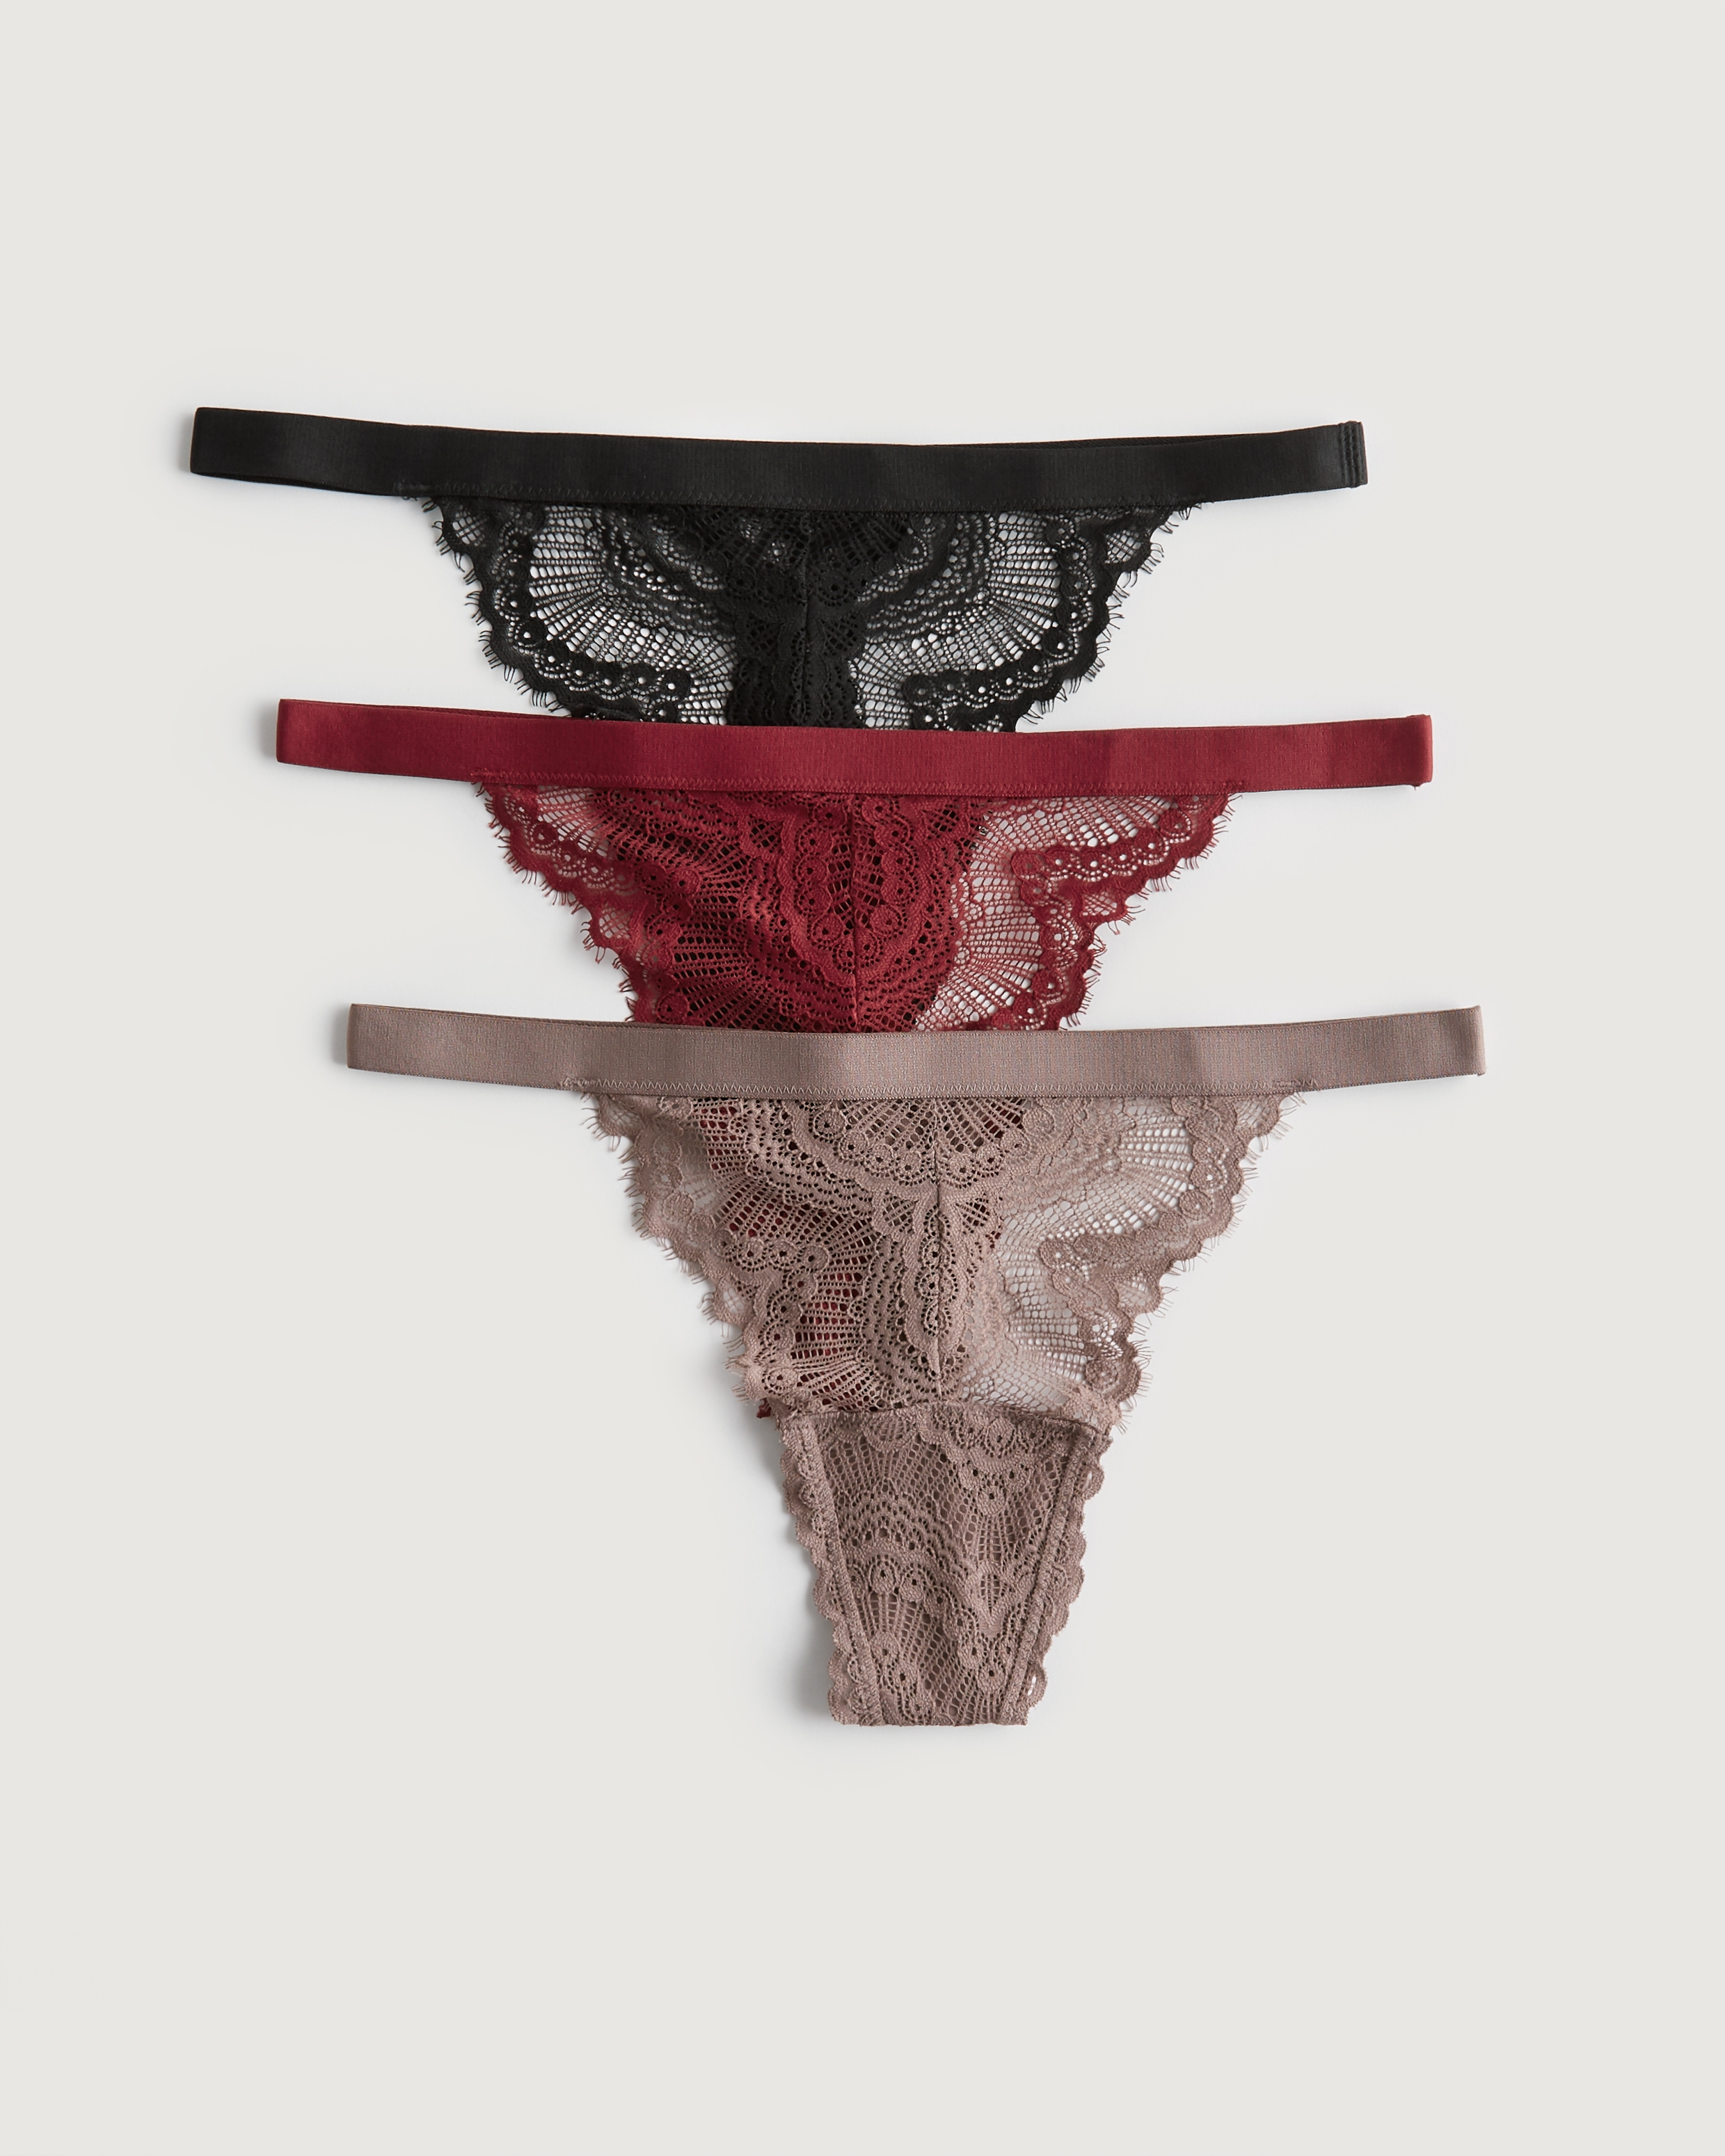 Hollister Gilly Hicks Lace String Thong Underwear 3-Pack